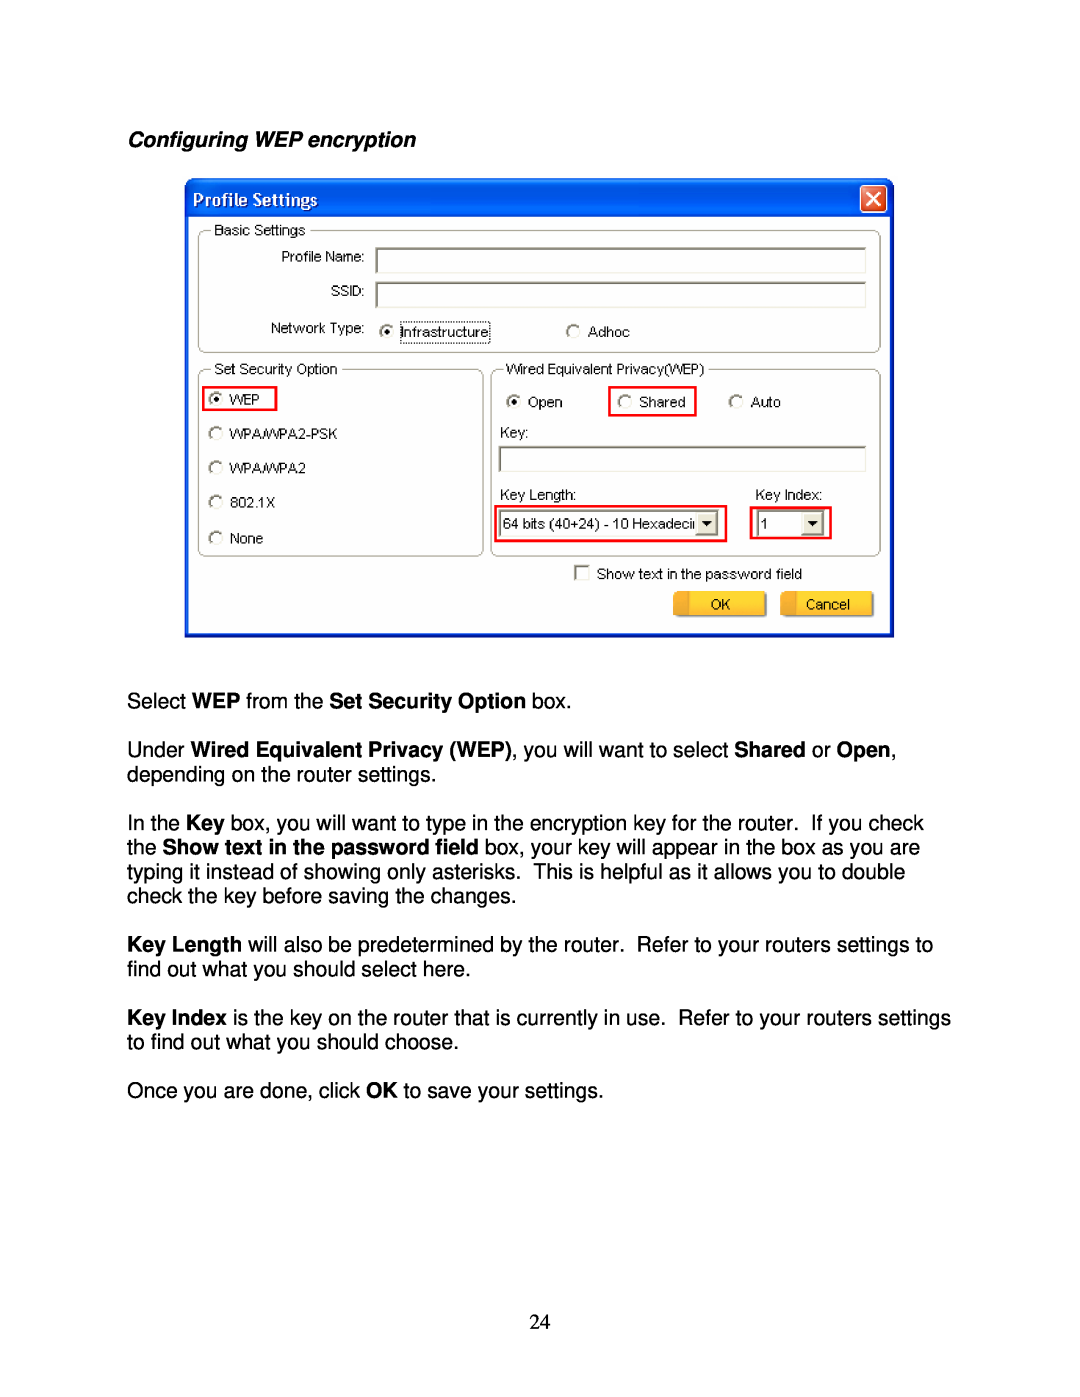 Airlink101 AWLL6090 user manual Configuring WEP encryption, Select WEP from the Set Security Option box 